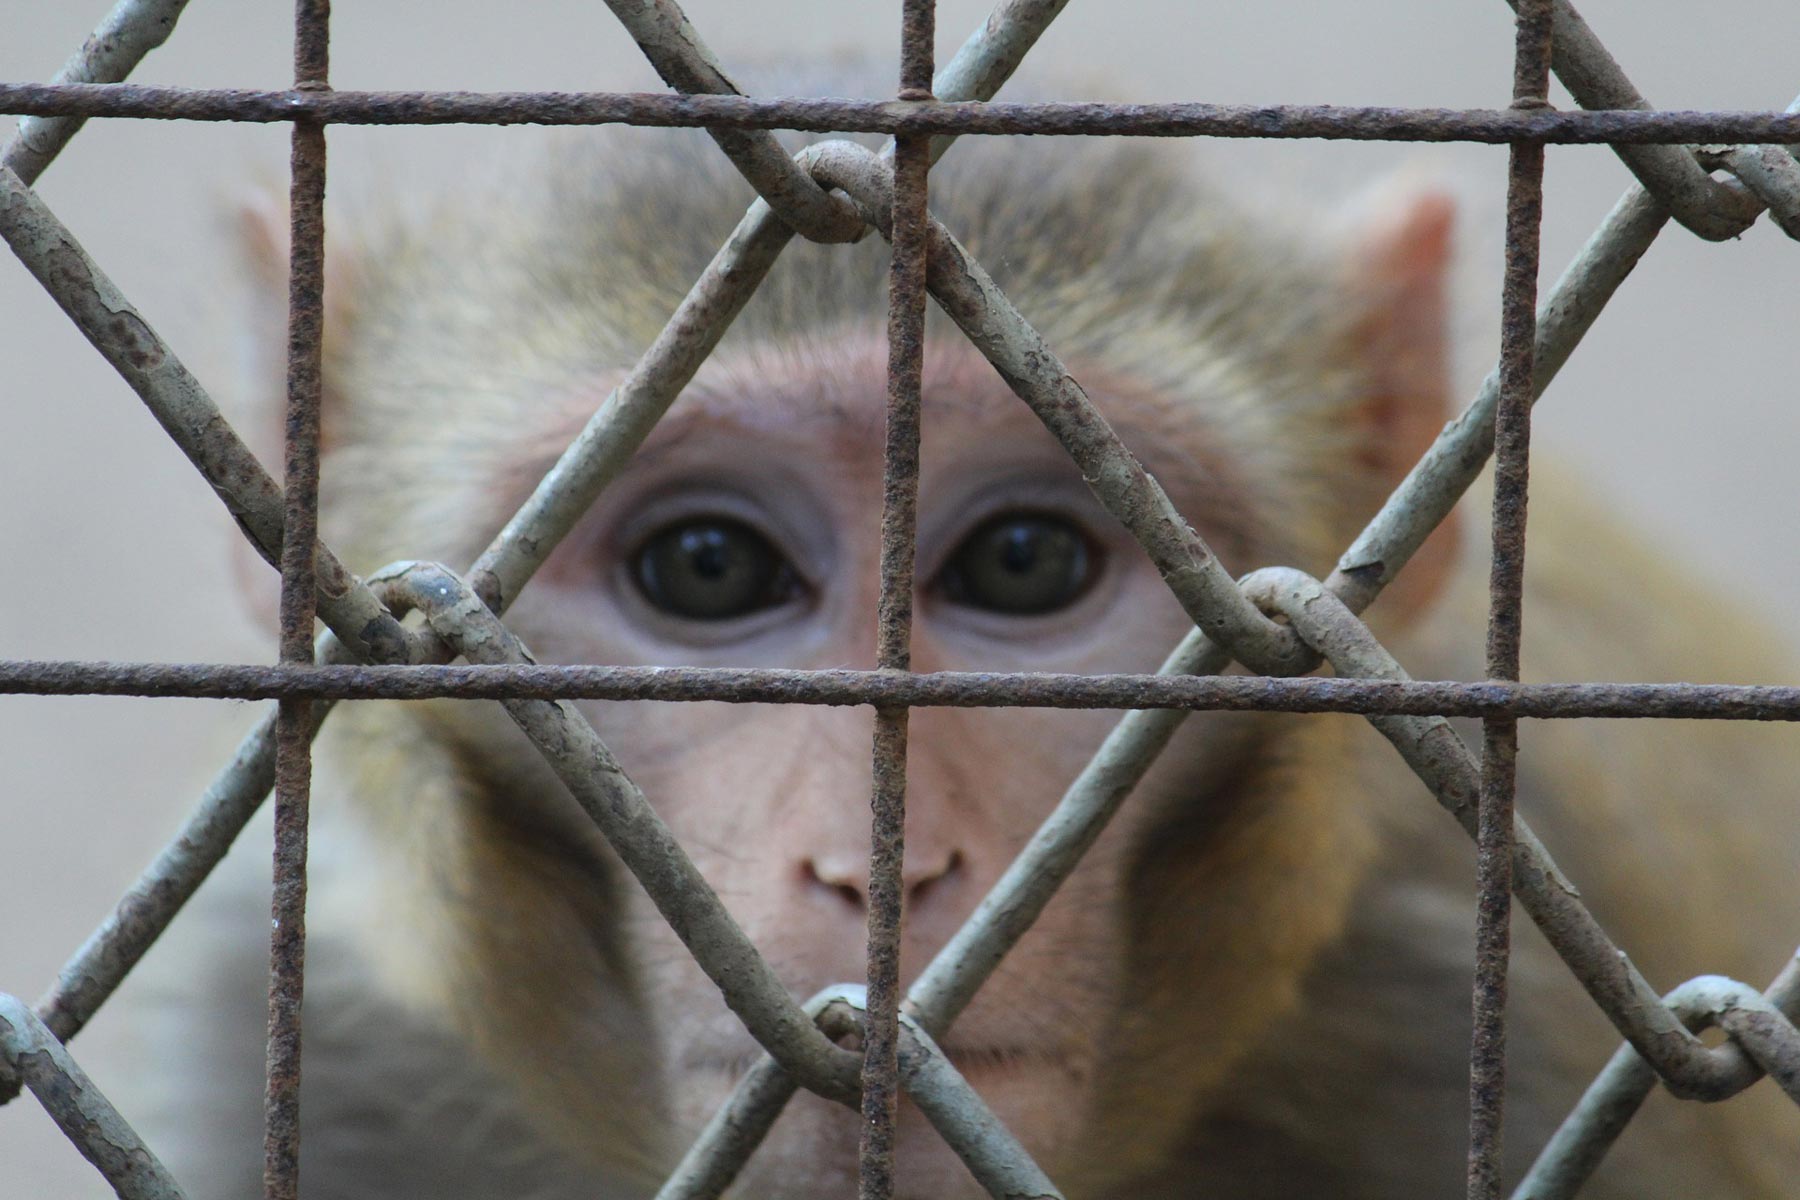 Animal Rights / Monkey in Cage